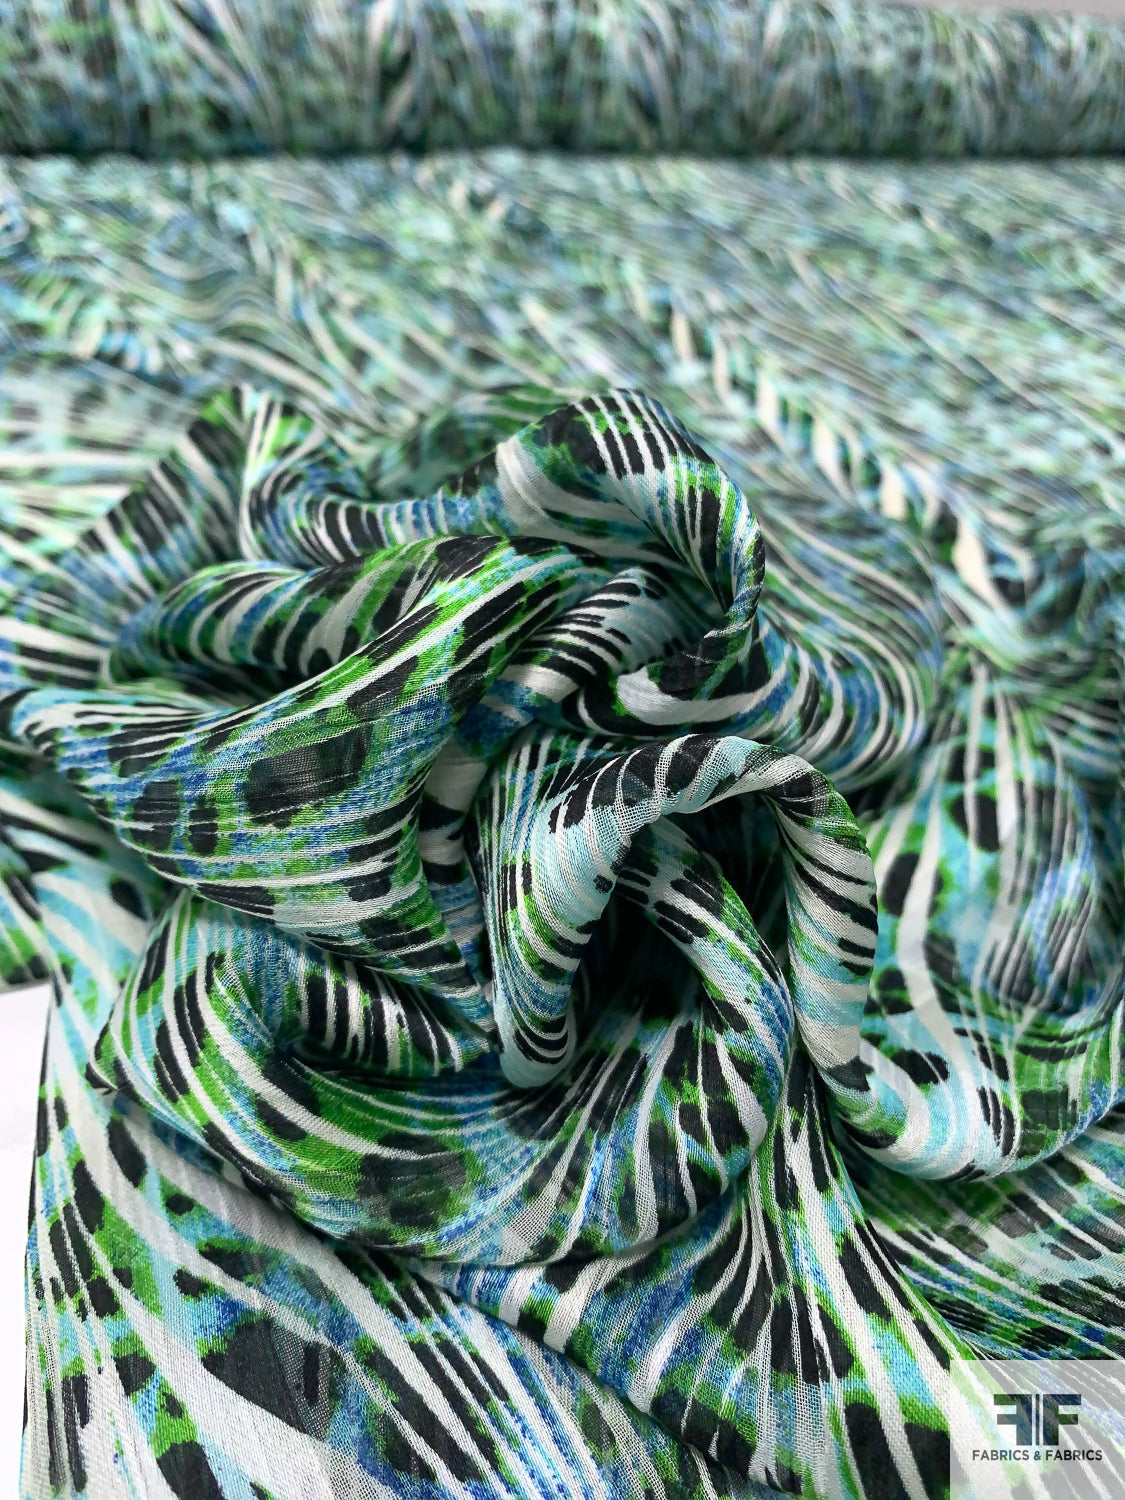 Animal Pattern and Streaky Lined Shadow Stripe Satin Polyester Chiffon - Turquoise / Green / Black / Off-White